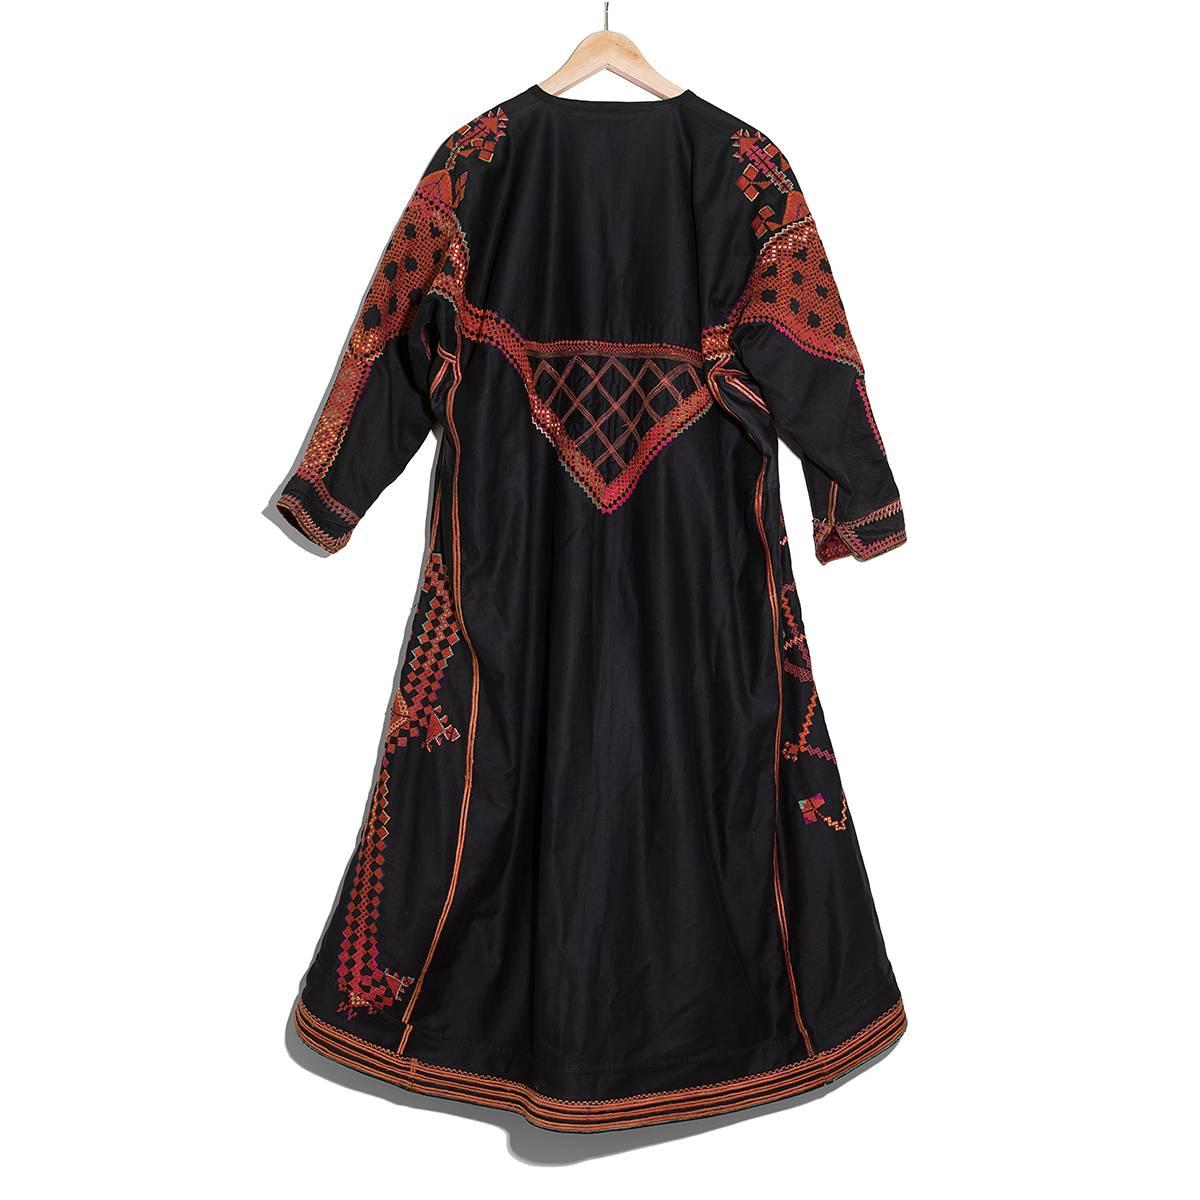 This is a very rare nomad berber cross-stitched male kaftan made of hand dyed colors in black cotton. The gown has some tears, one hole in the left sleeve, one small light fade.
Good antique conditions.
Size XXL